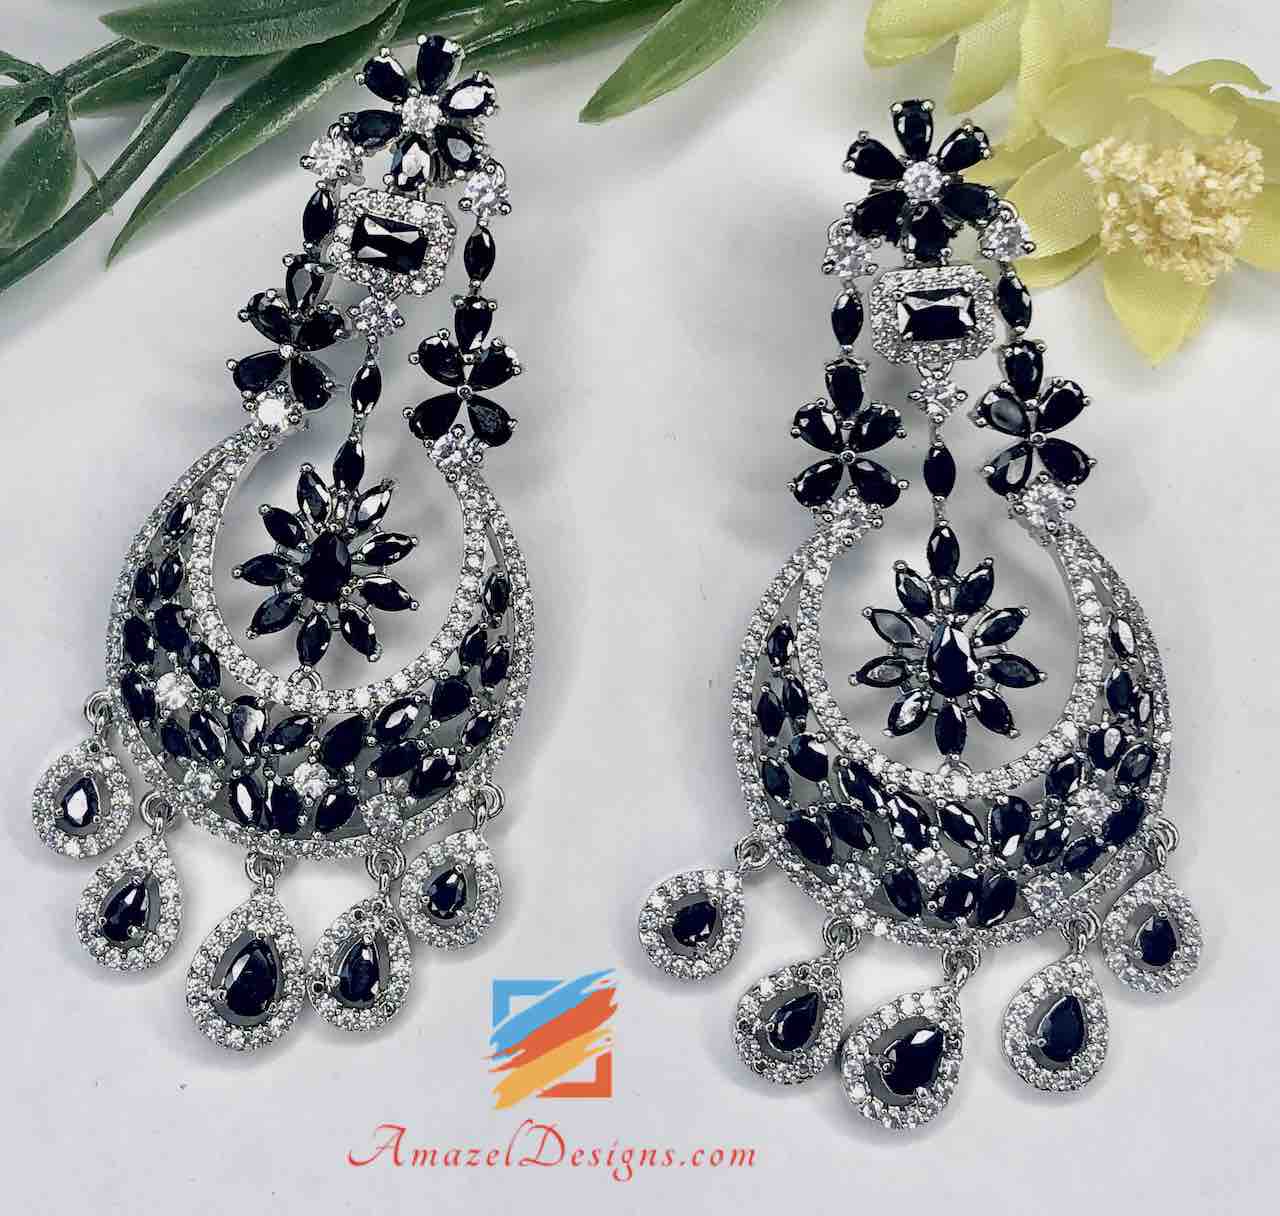 Buy Ratnavali Jewels American Diamond Necklace Set Gold Plated Traditional  Stylish Wedding Western Ad Jewellery Set with Dangler Earring for Women and  Girls Online at Best Prices in India - JioMart.